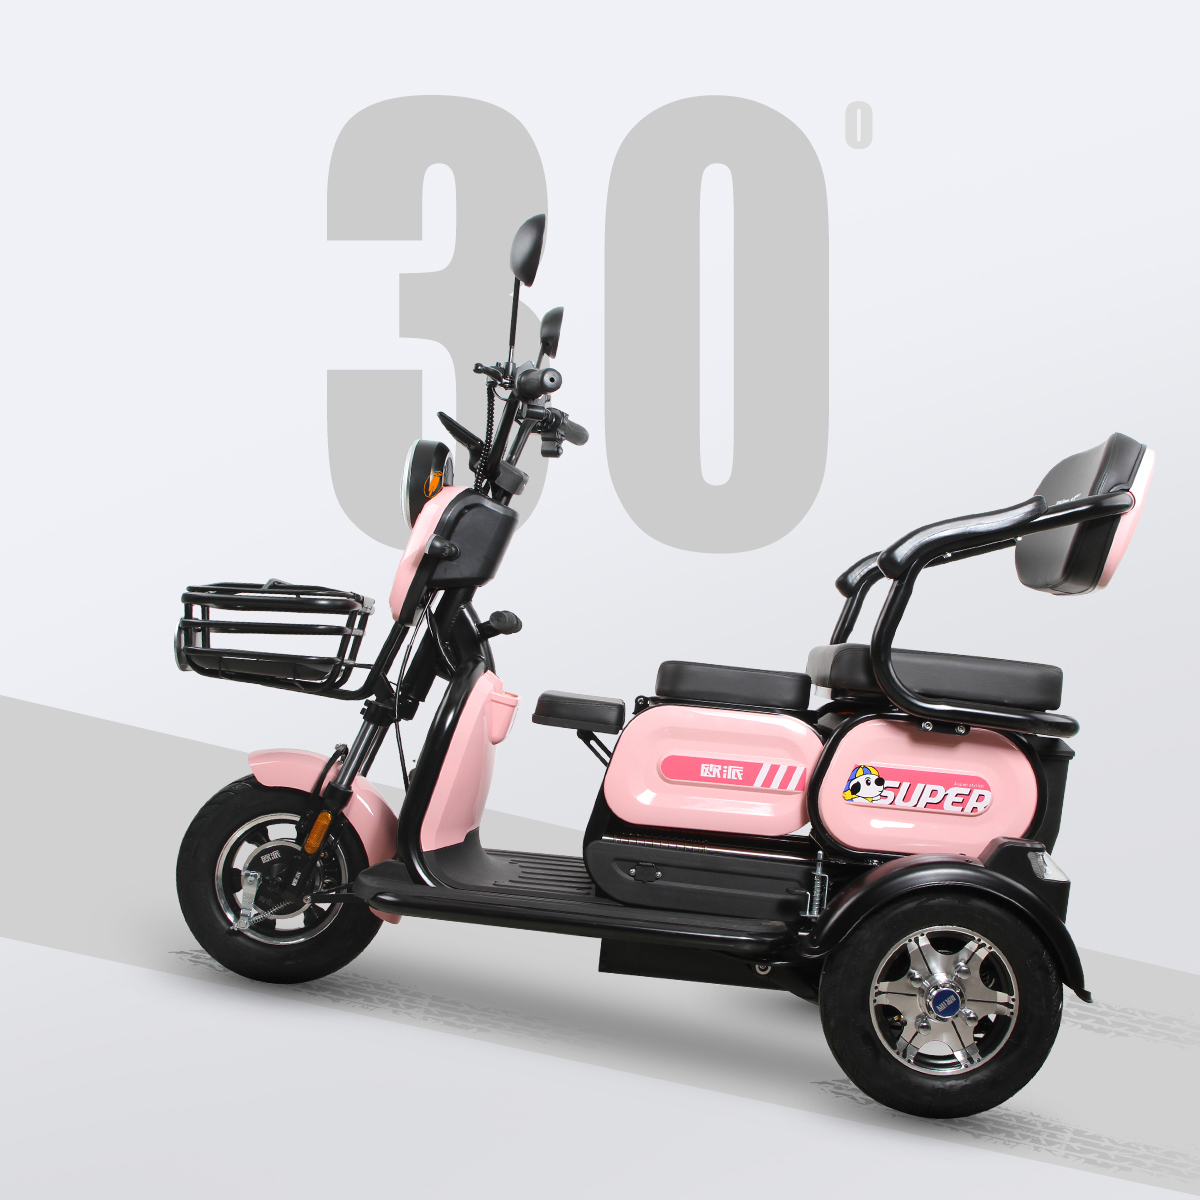 Cyclemix Product Electric Tricycle X5 Details 4